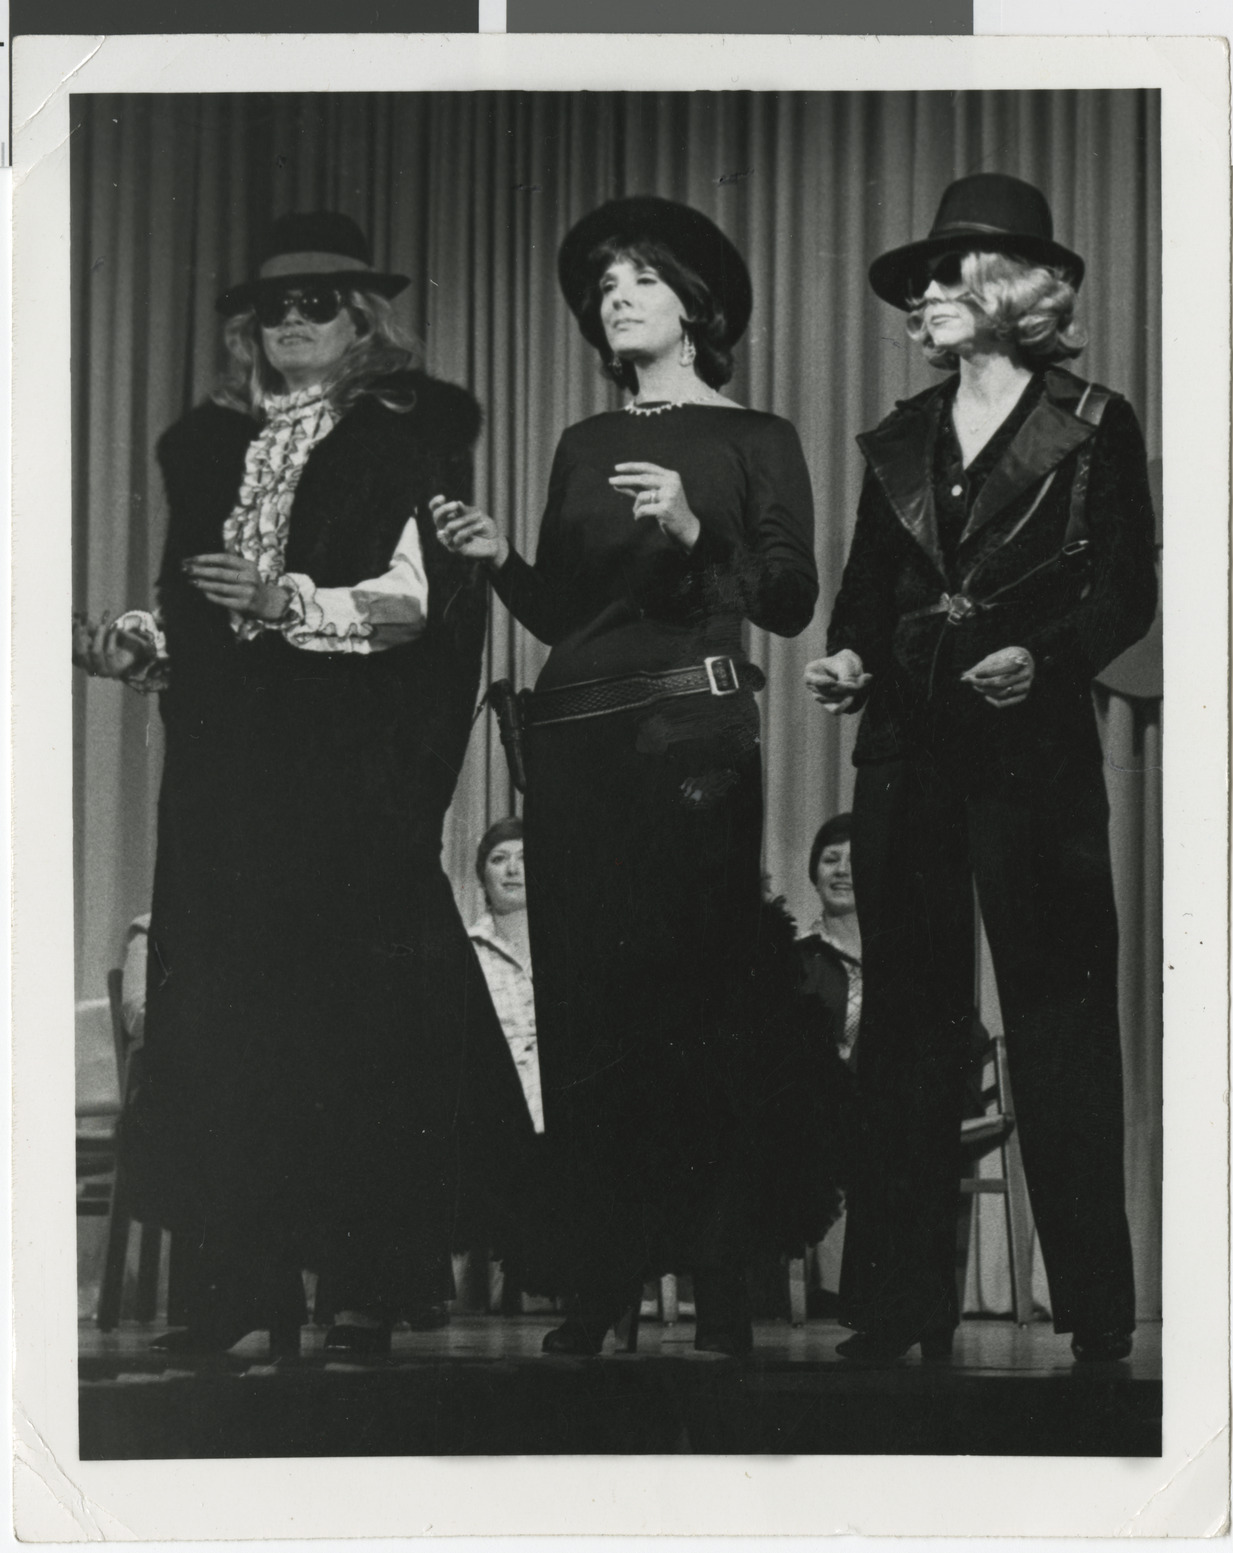 Photograph of actors on stage